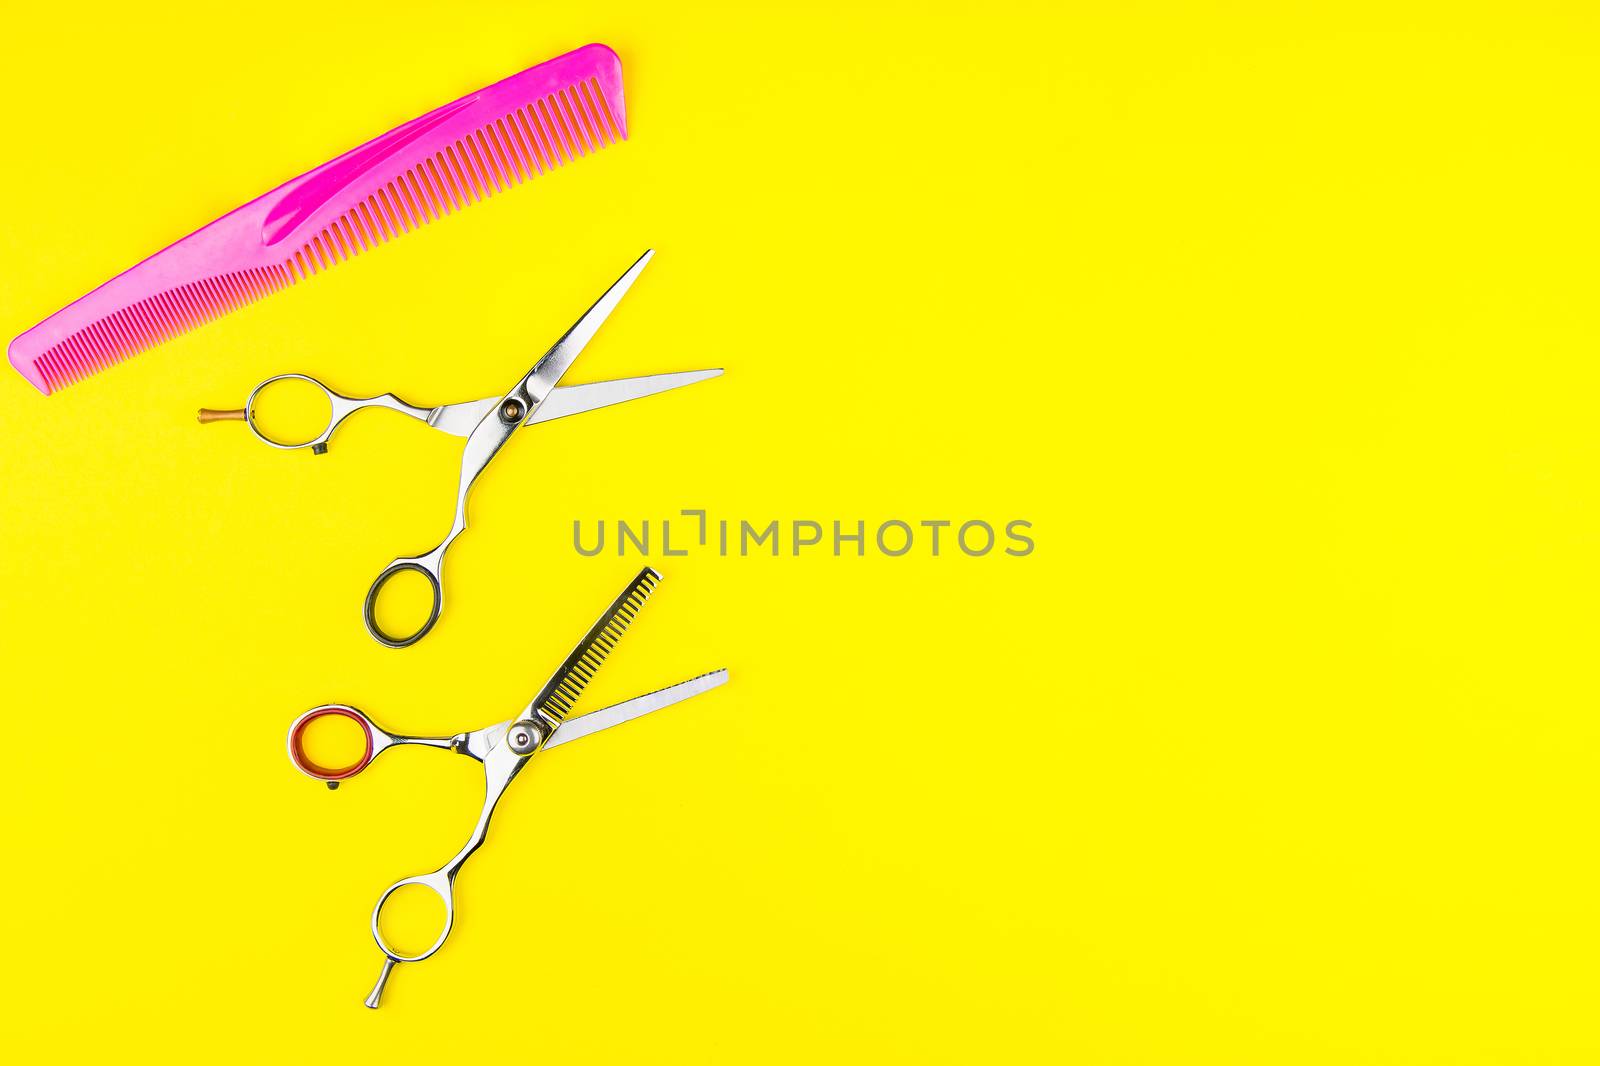 Stylish Professional Barber Scissors and comb on yellow backgrou by Bubbers